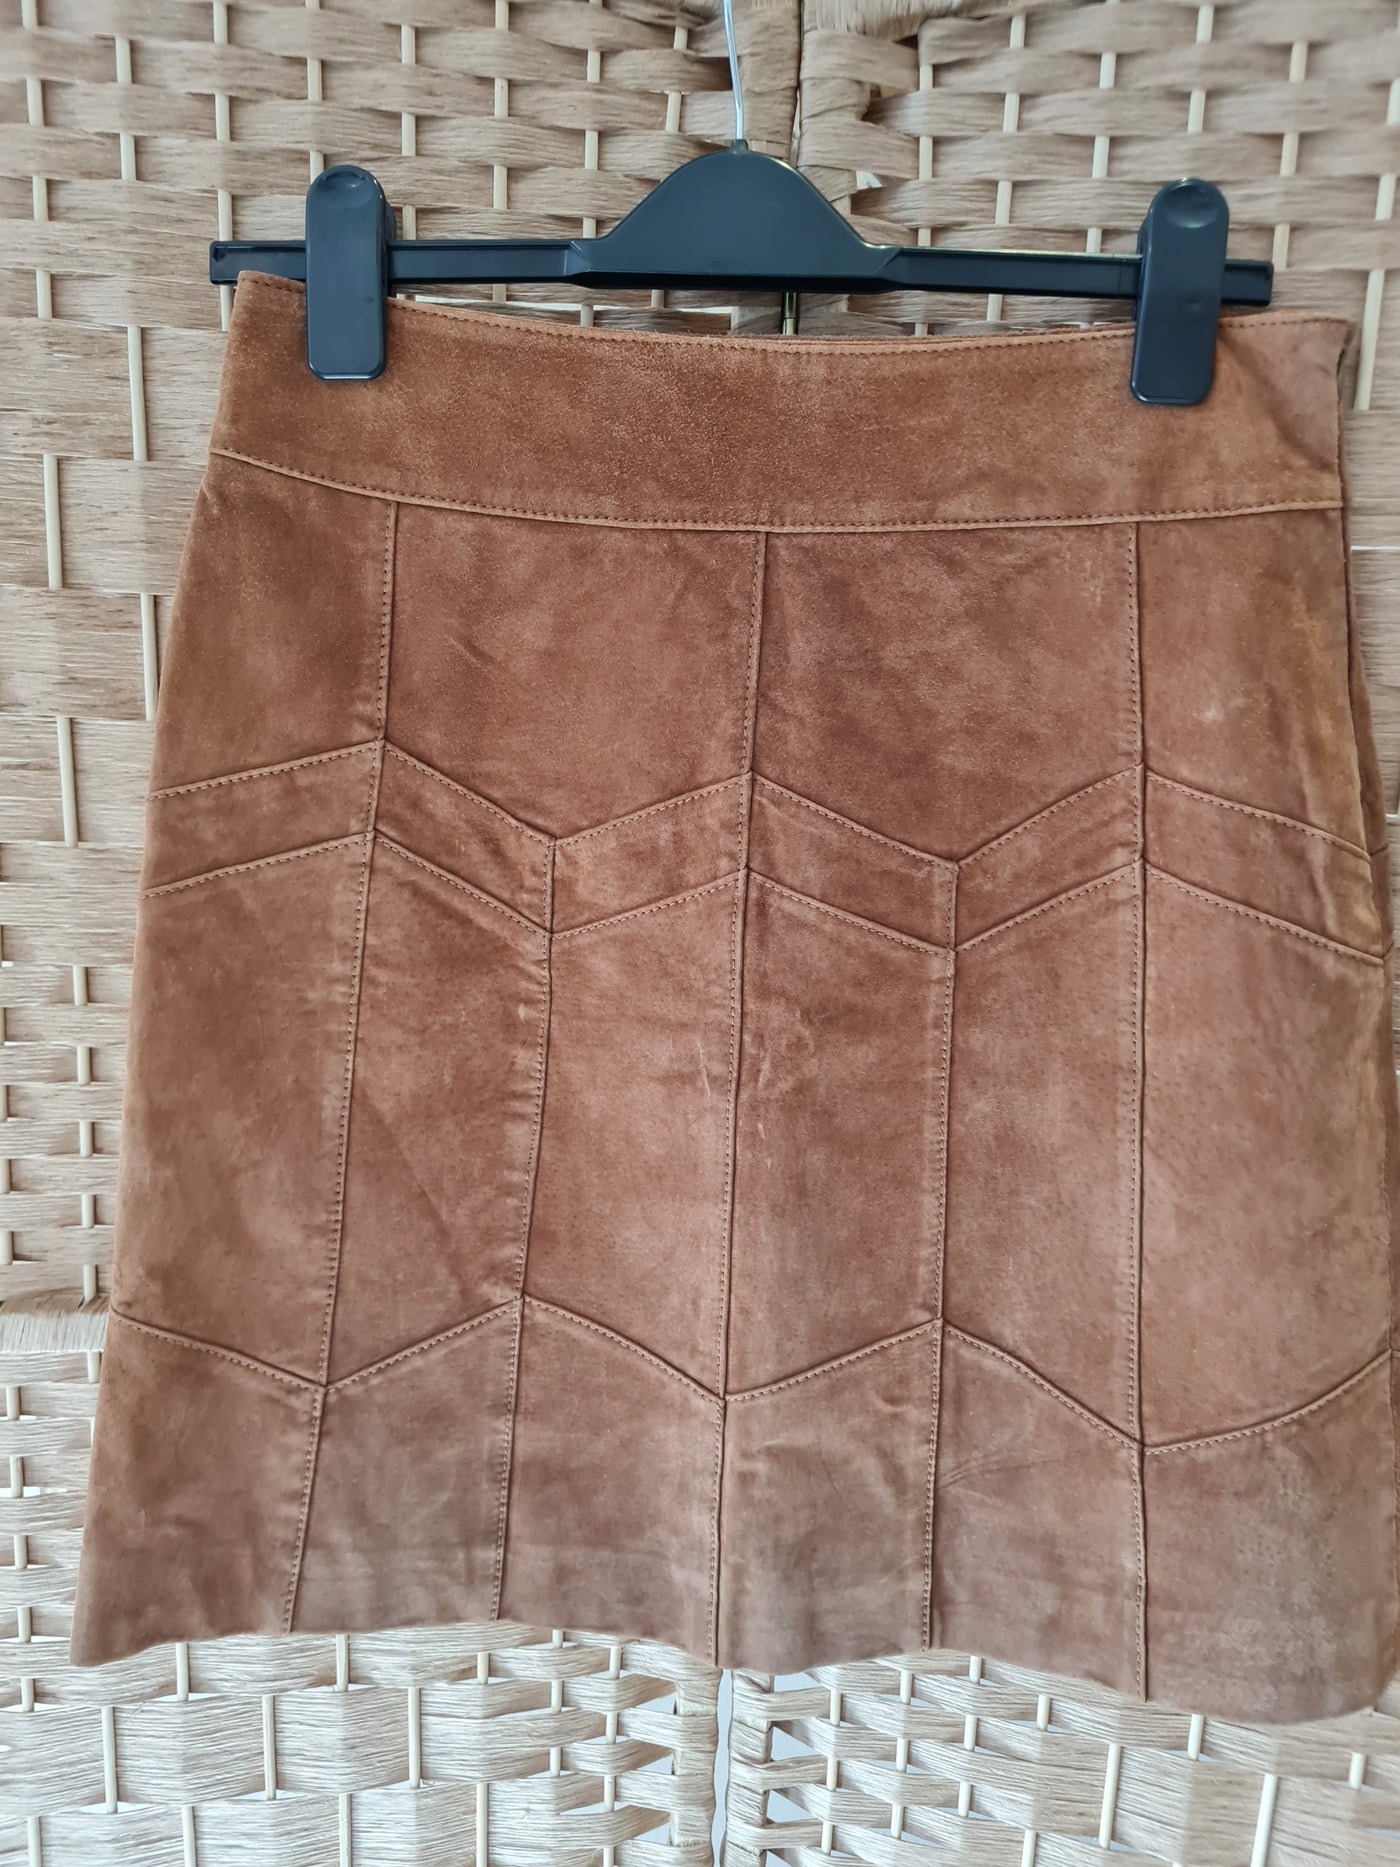 Oasis Tan Suede Skirt 10 New RRP £70